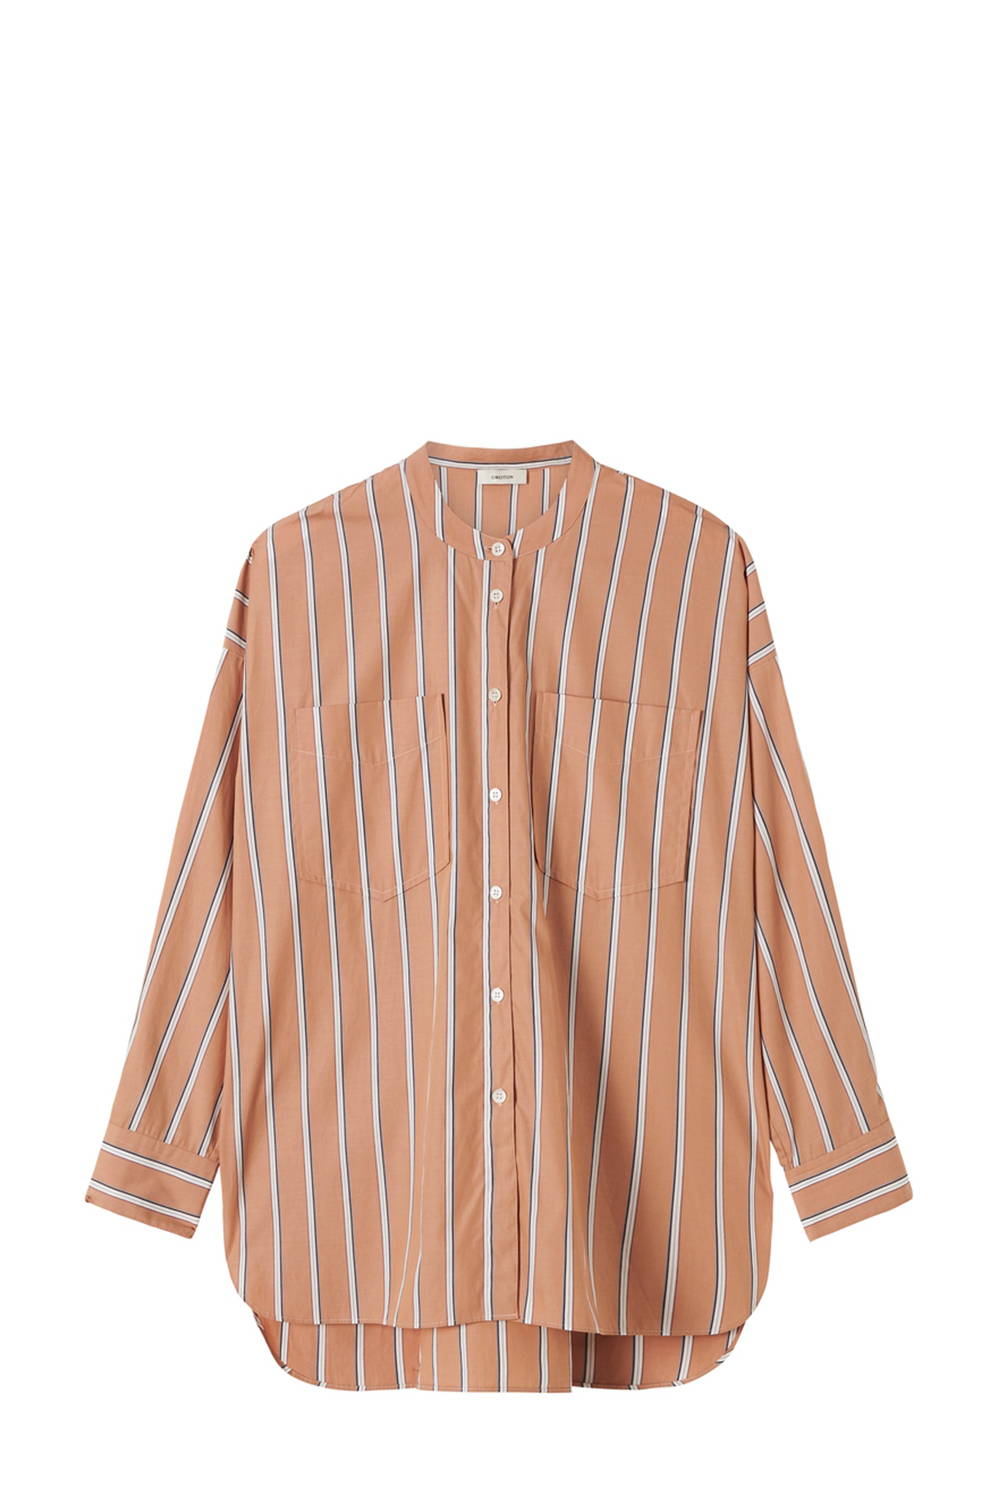 Oroton Striped Cotton Long Sleeve Shirt pink clay 